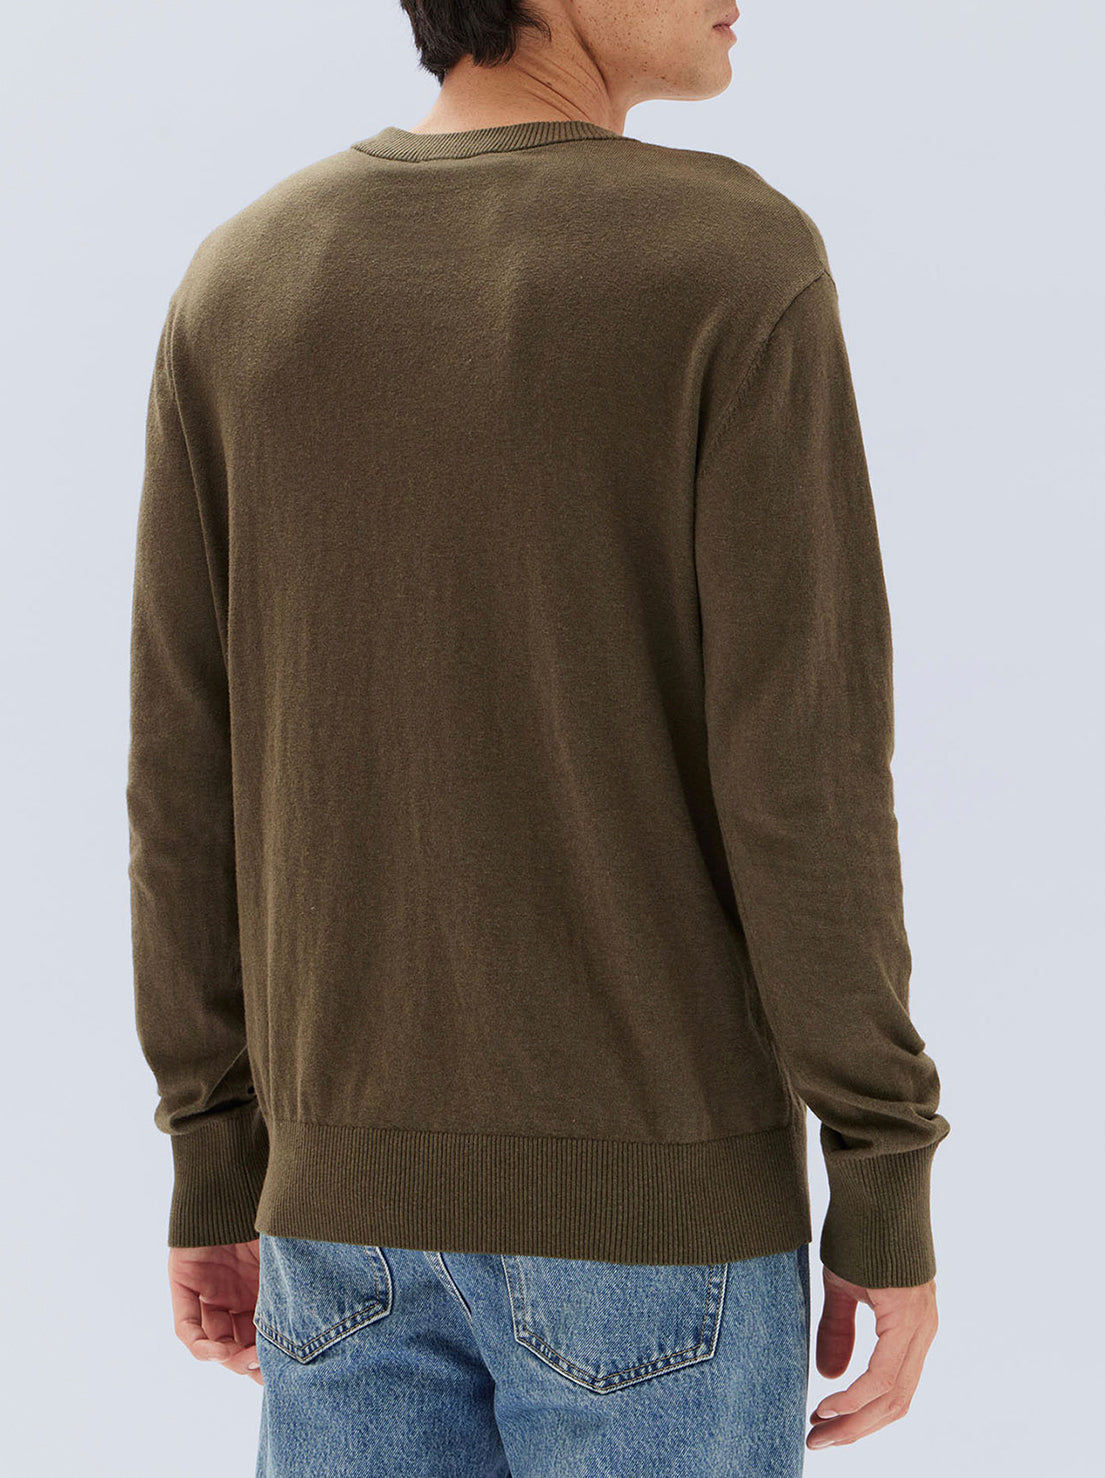 Assembly - Mens Cotton Cashmere Long Sleeve Sweater - Pea Marle